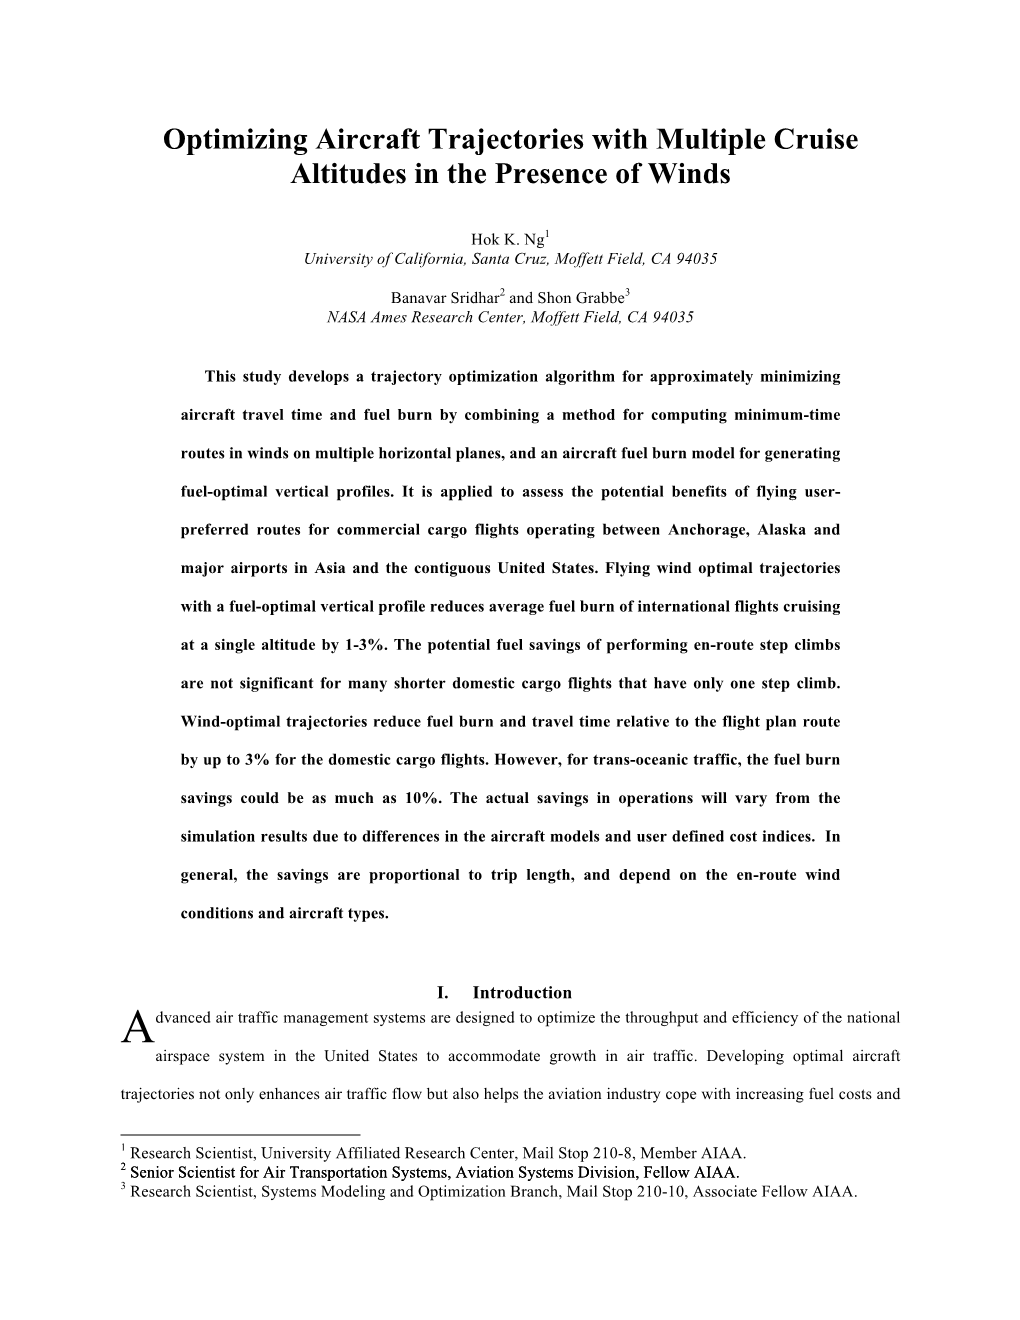 Optimizing Aircraft Trajectories with Multiple Cruise Altitudes in the Presence of Winds